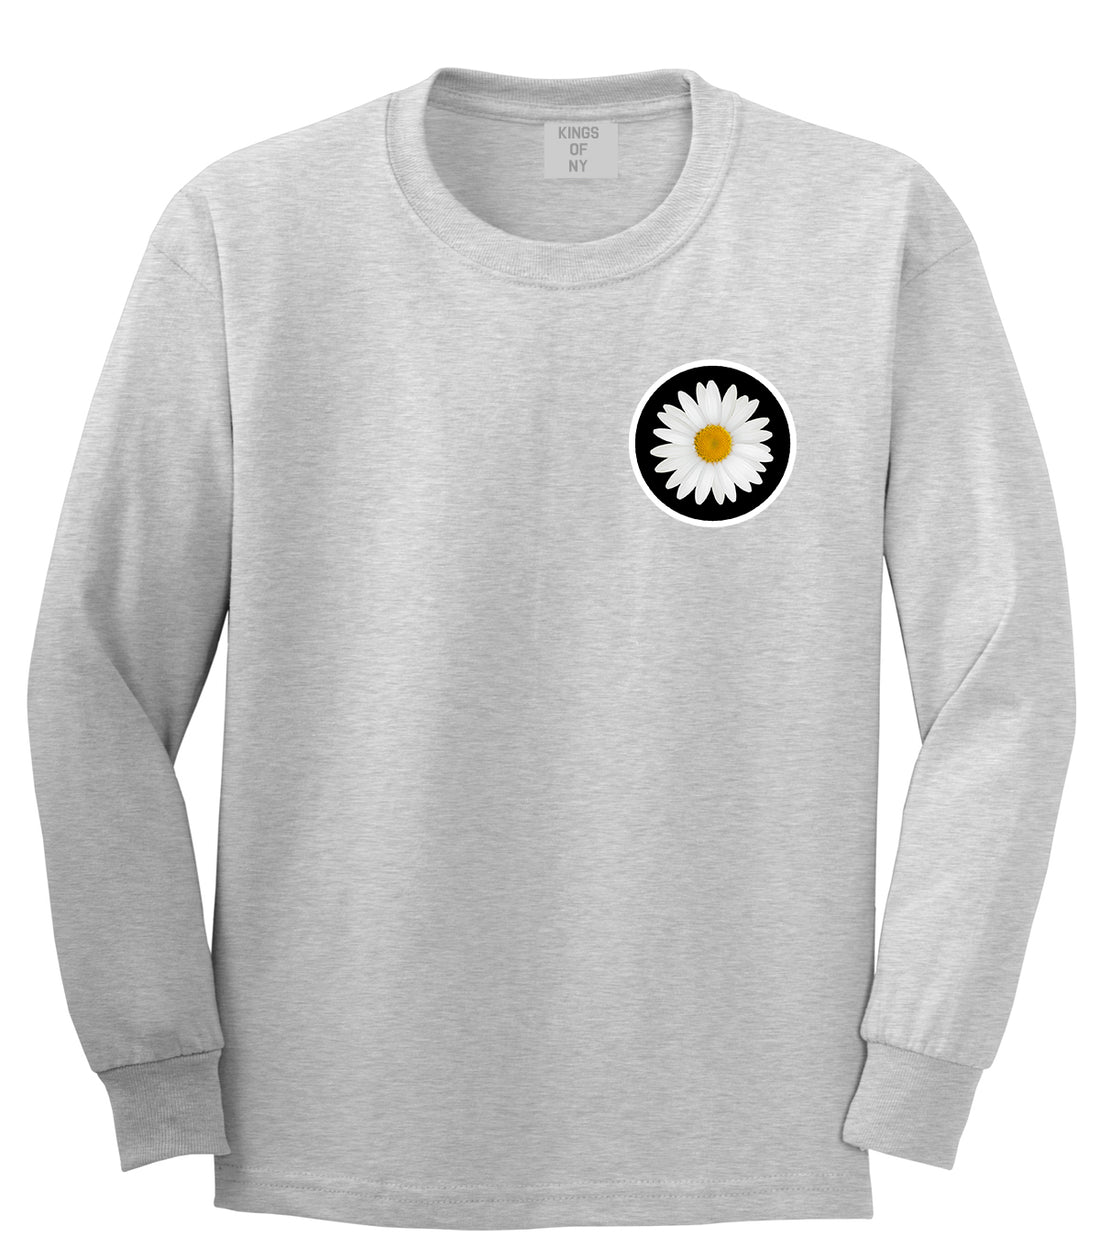 Daisy Flower Chest Mens Grey Long Sleeve T-Shirt by Kings Of NY